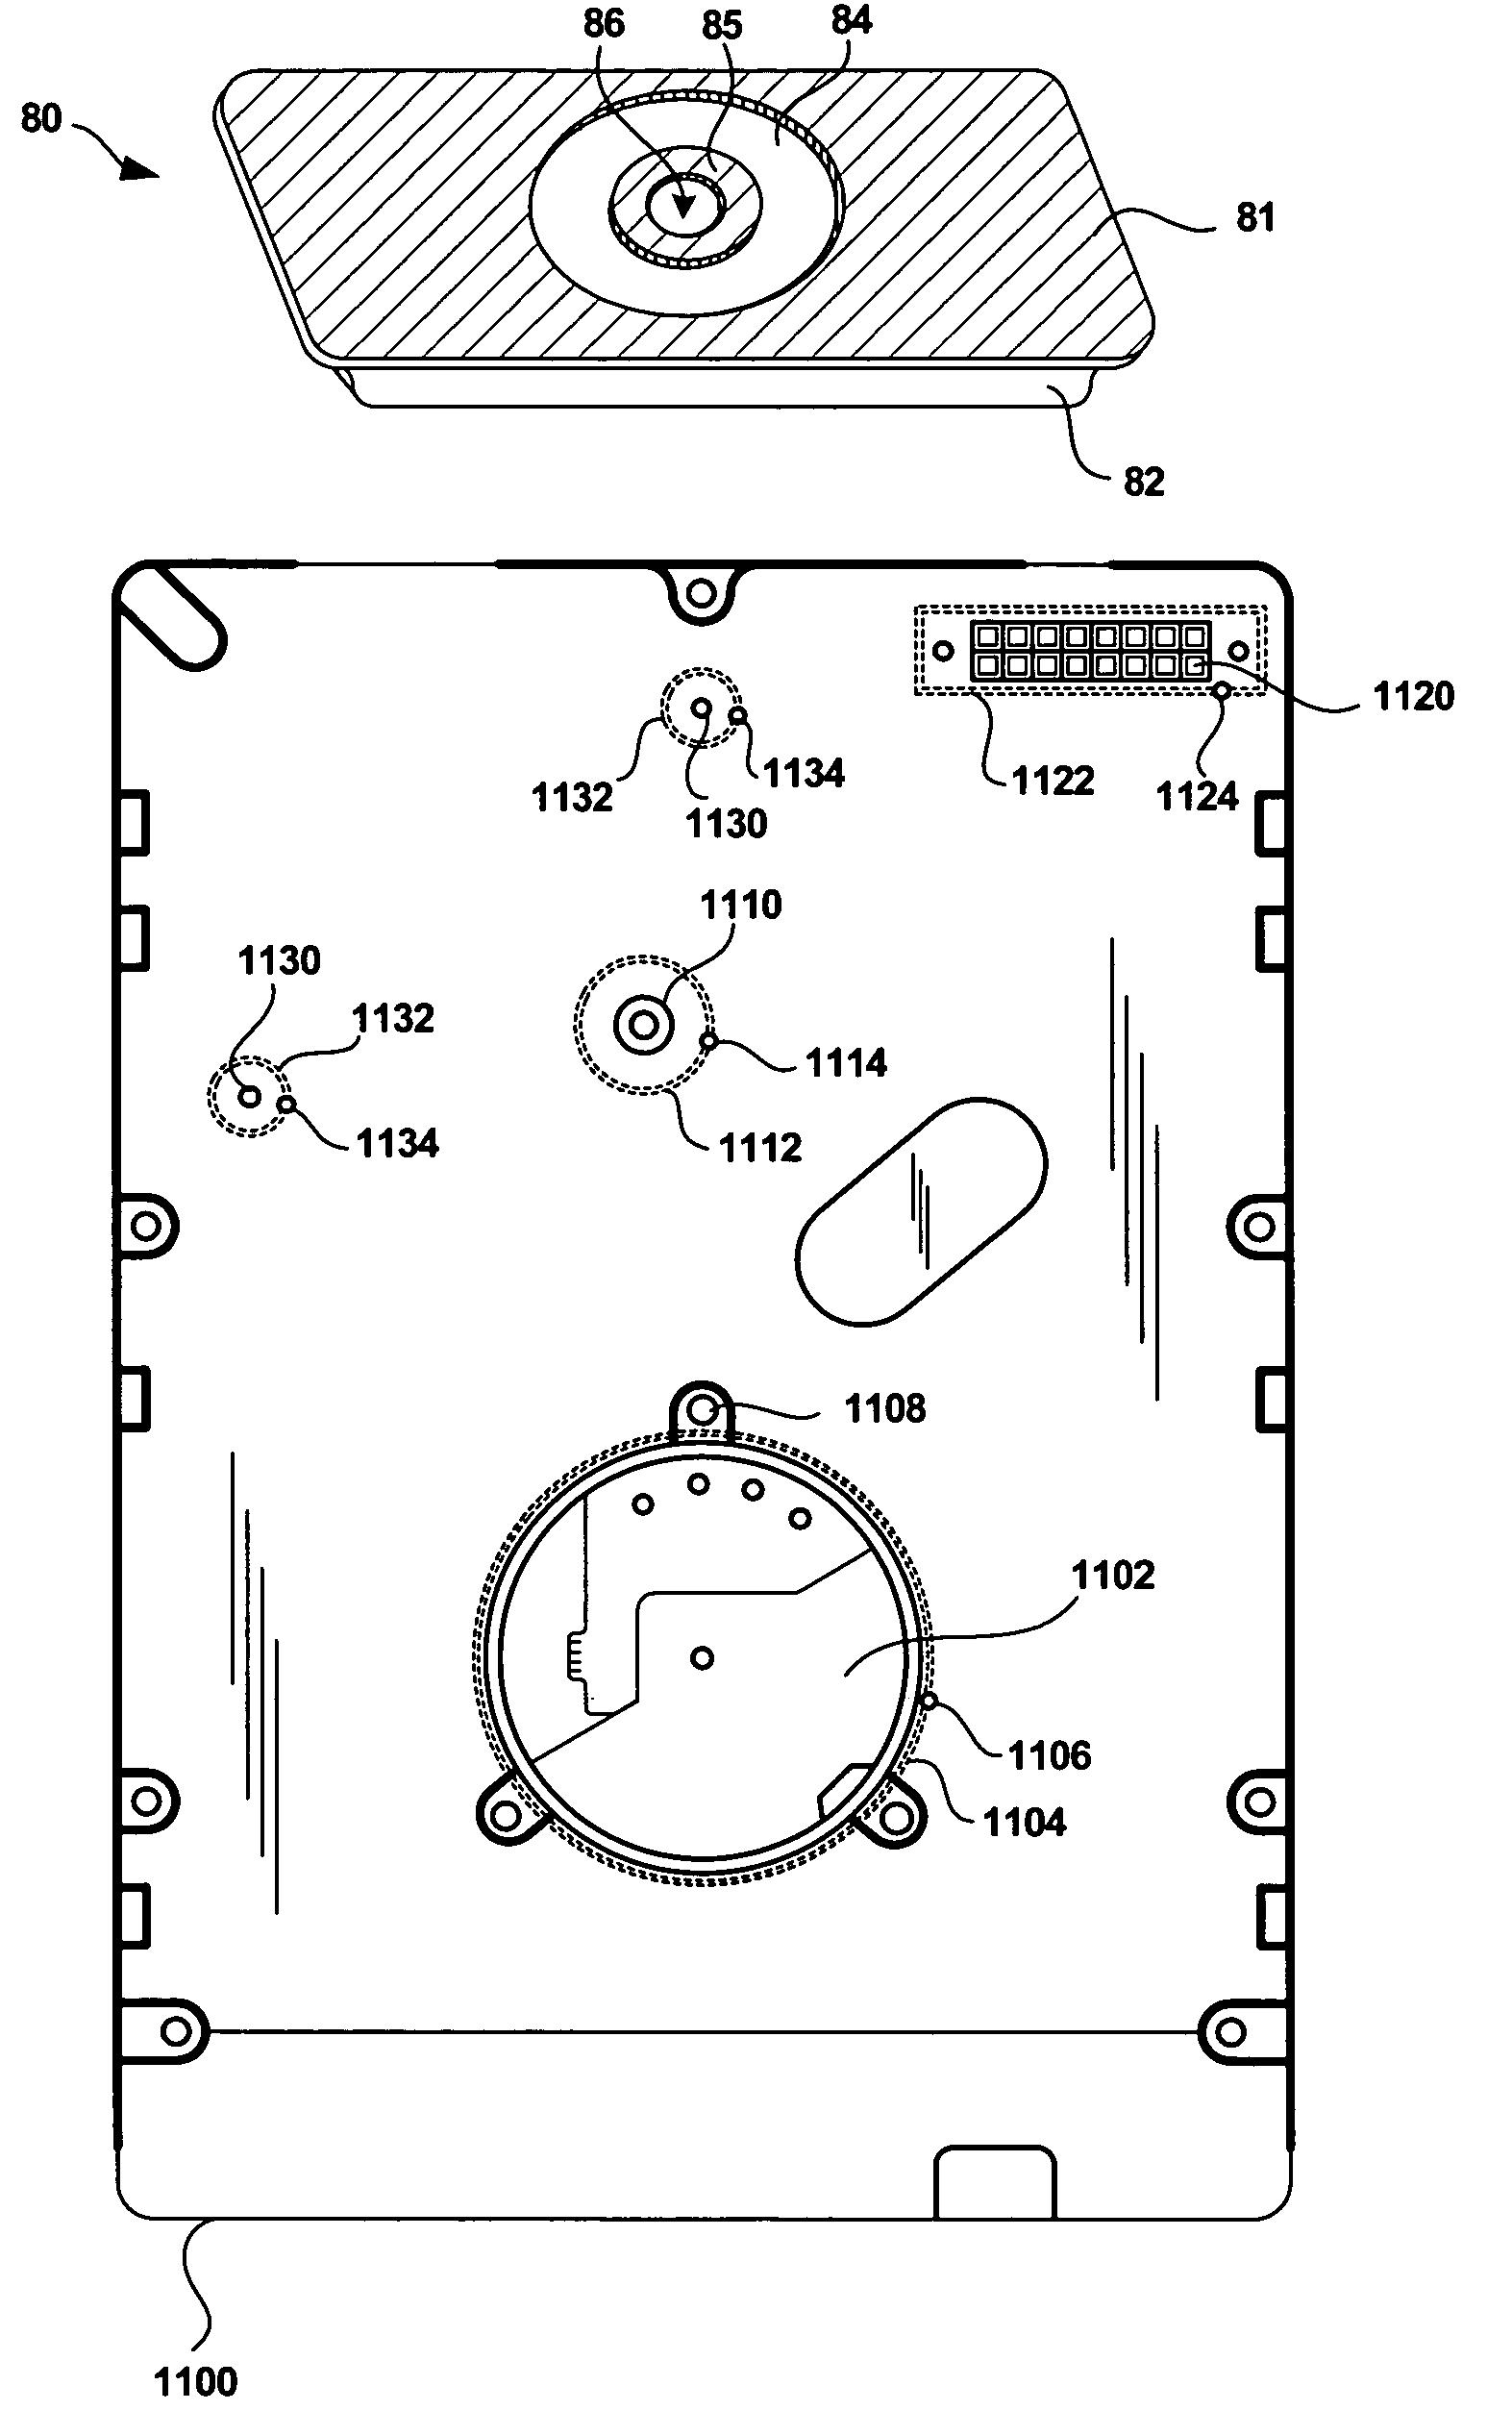 Disk drive configured to enable non destructive leak detection at the interface between a drive sub-component and the disk drive housing